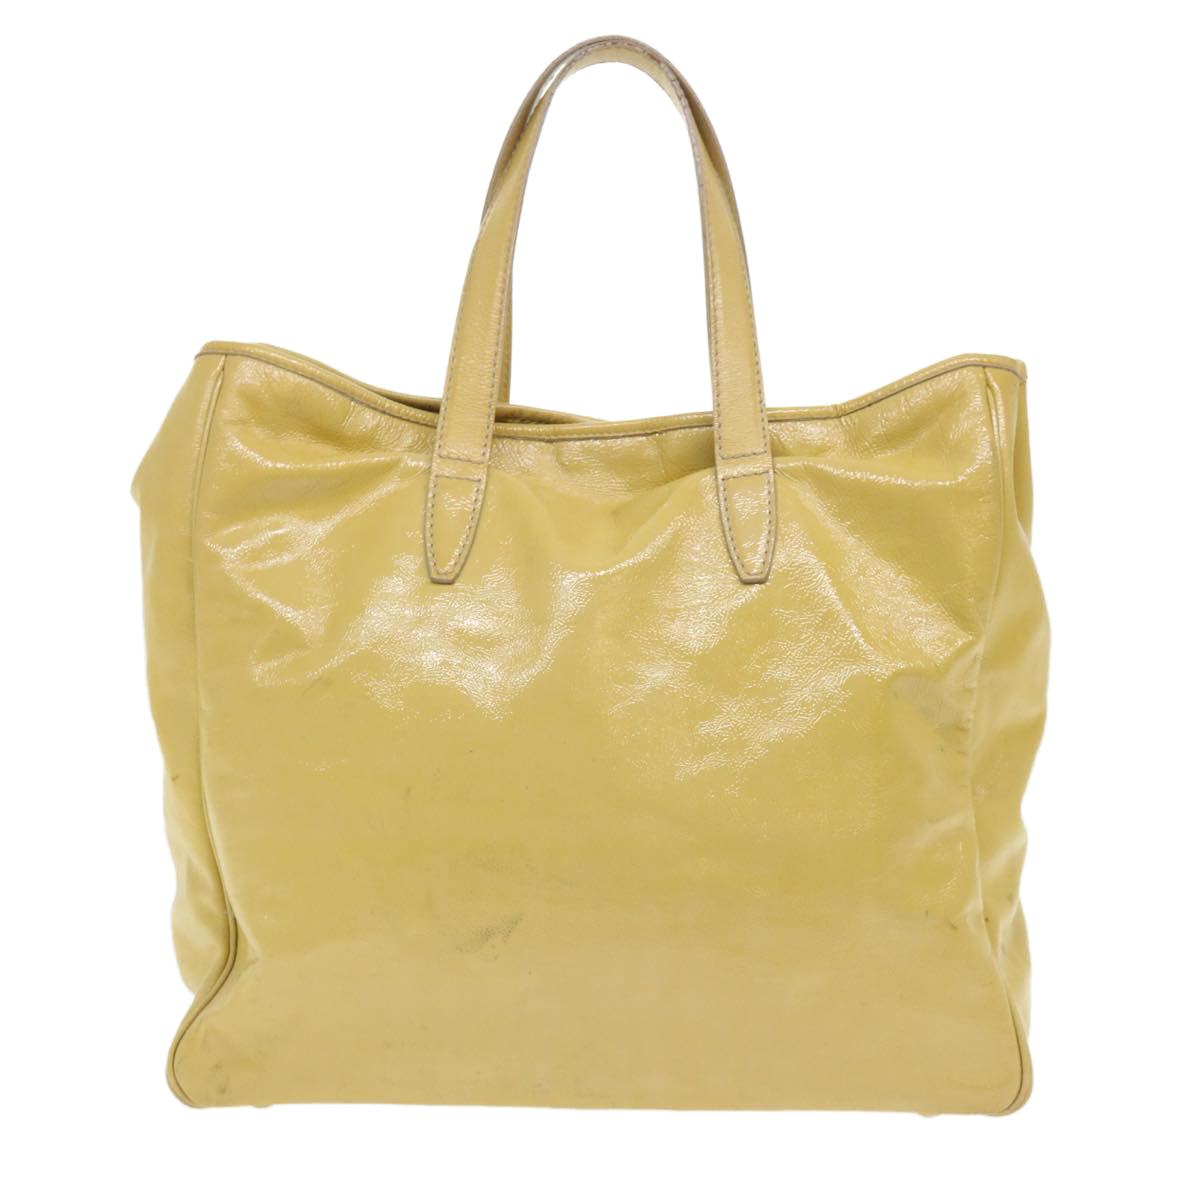 SAINT LAURENT Y Mail Tote Bag Patent leather Yellow 188651 Auth yk7771